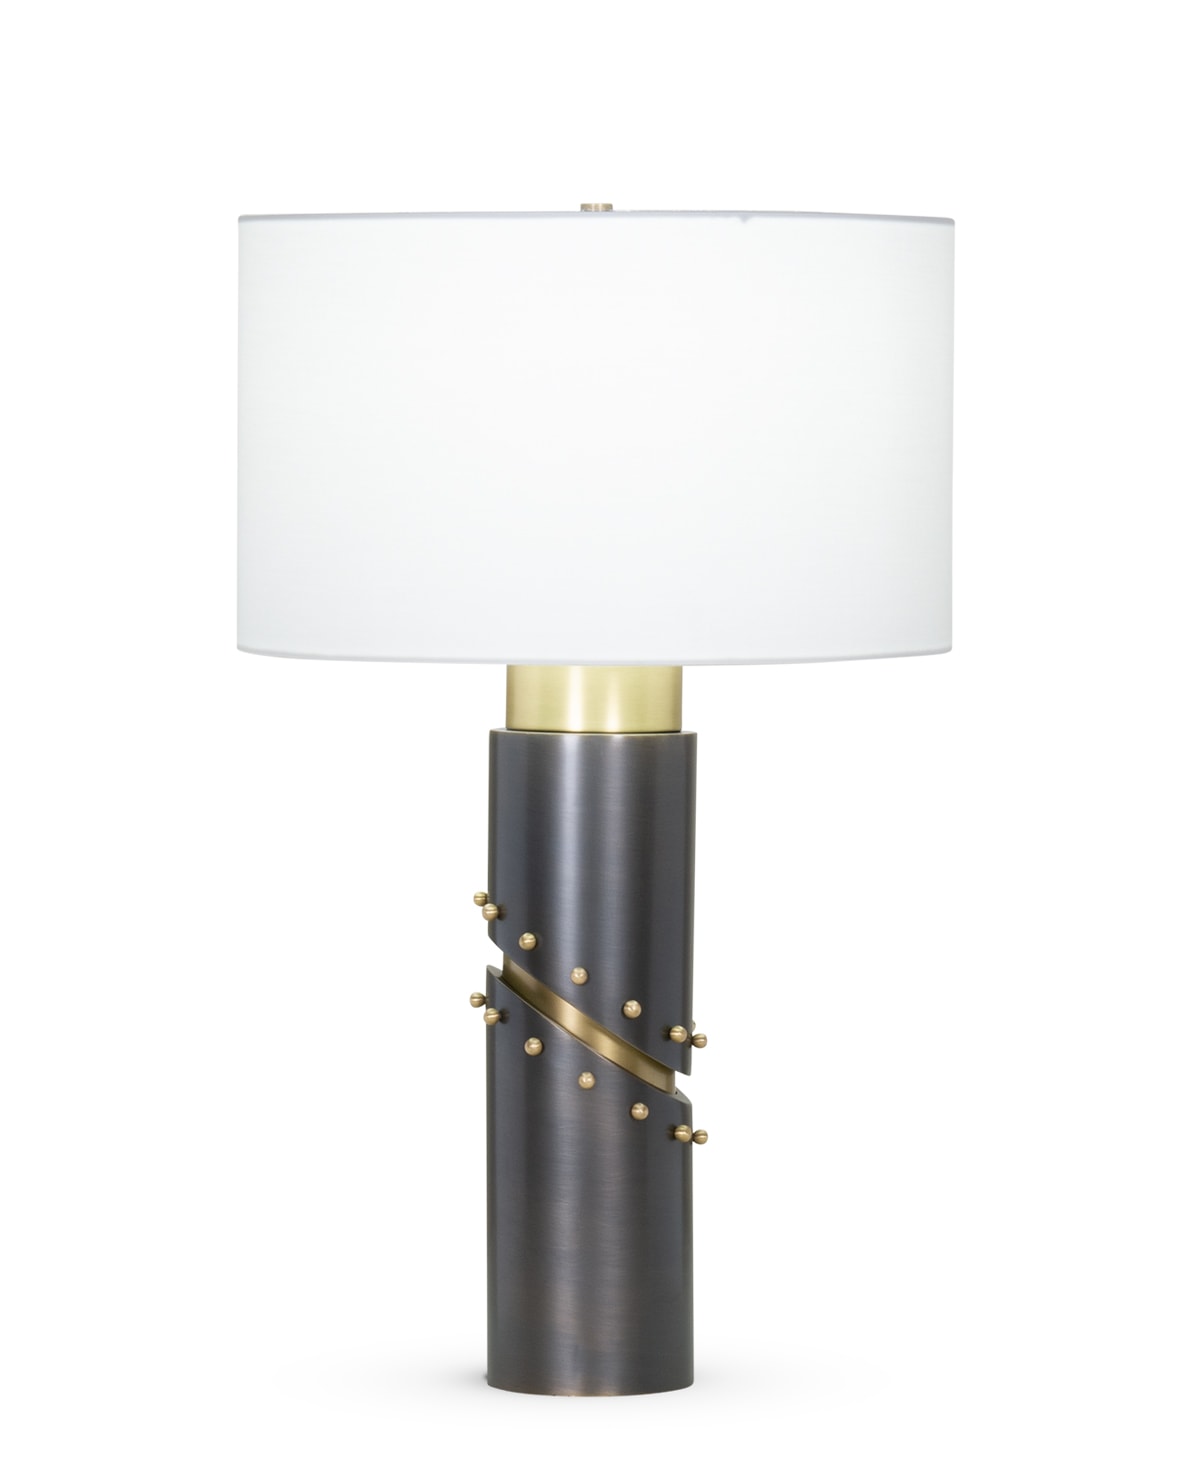 FlowDecor Wales Table Lamp in metal with antique brass & bronze finishes and off-white cotton drum shade (# 4407)